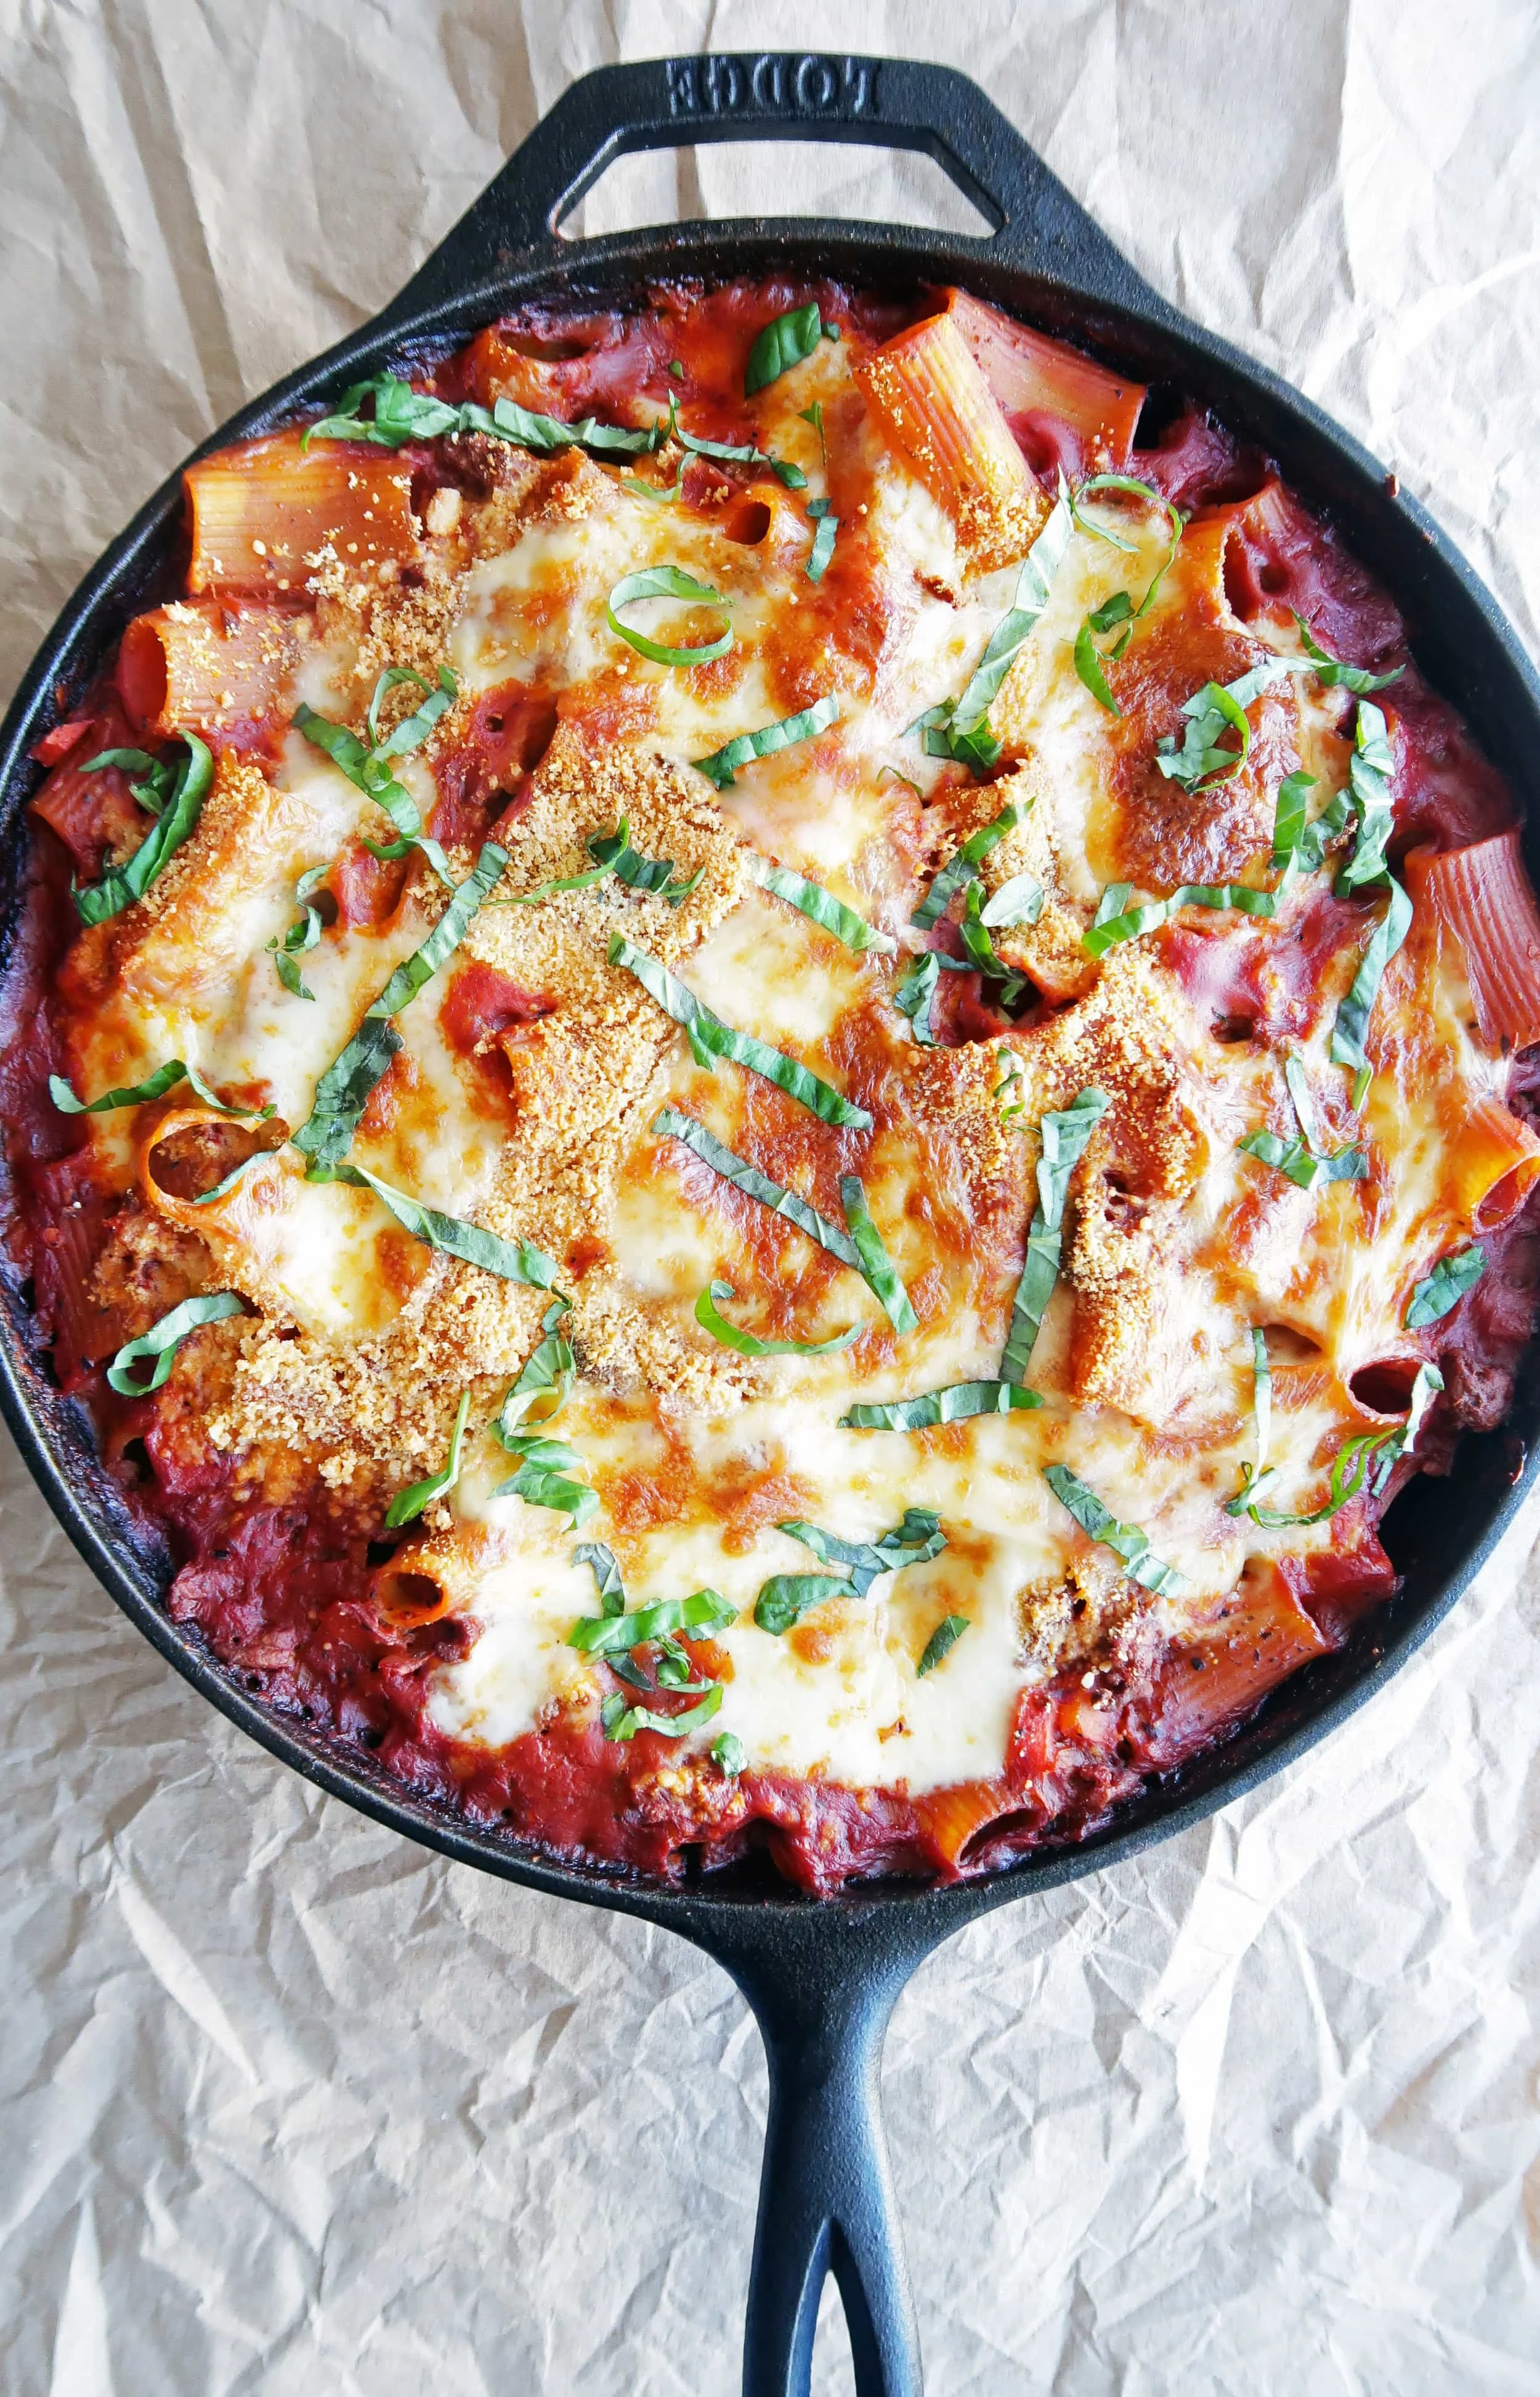 Baked Beef Pasta Casserole with melted cheesy topping and fresh basil in a cast-iron skillet.